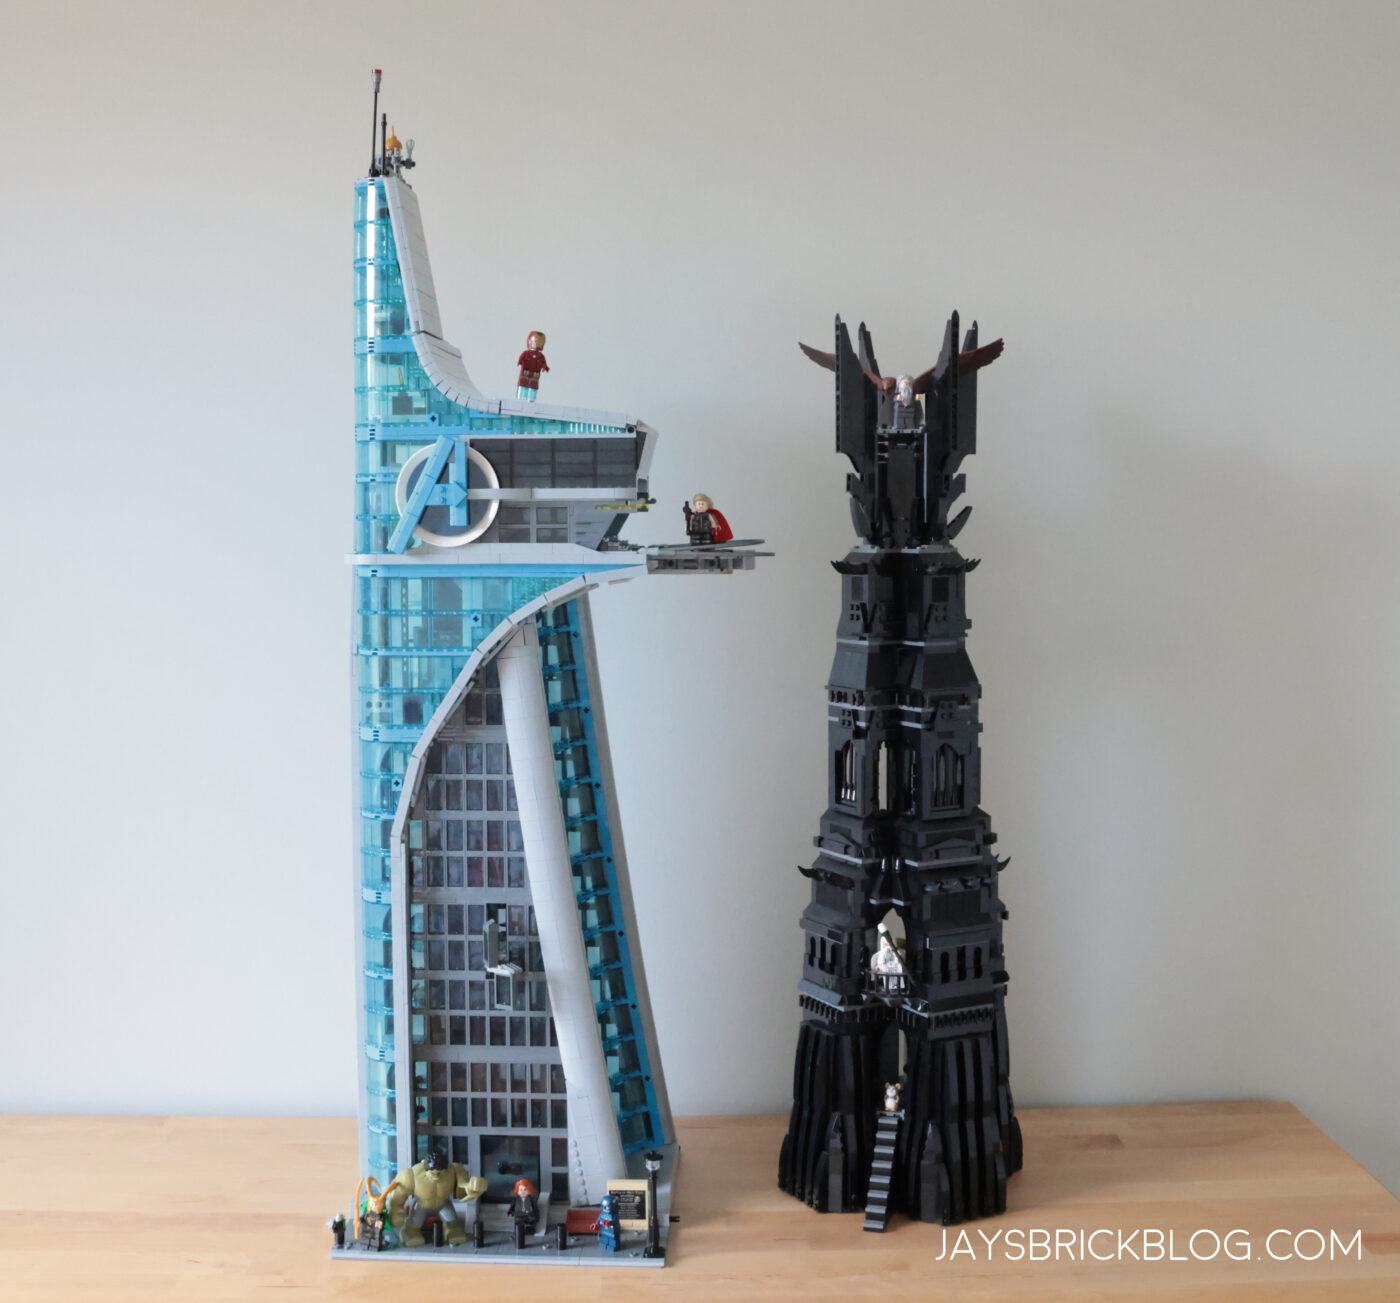 Just how tall is the LEGO Avengers Tower?3